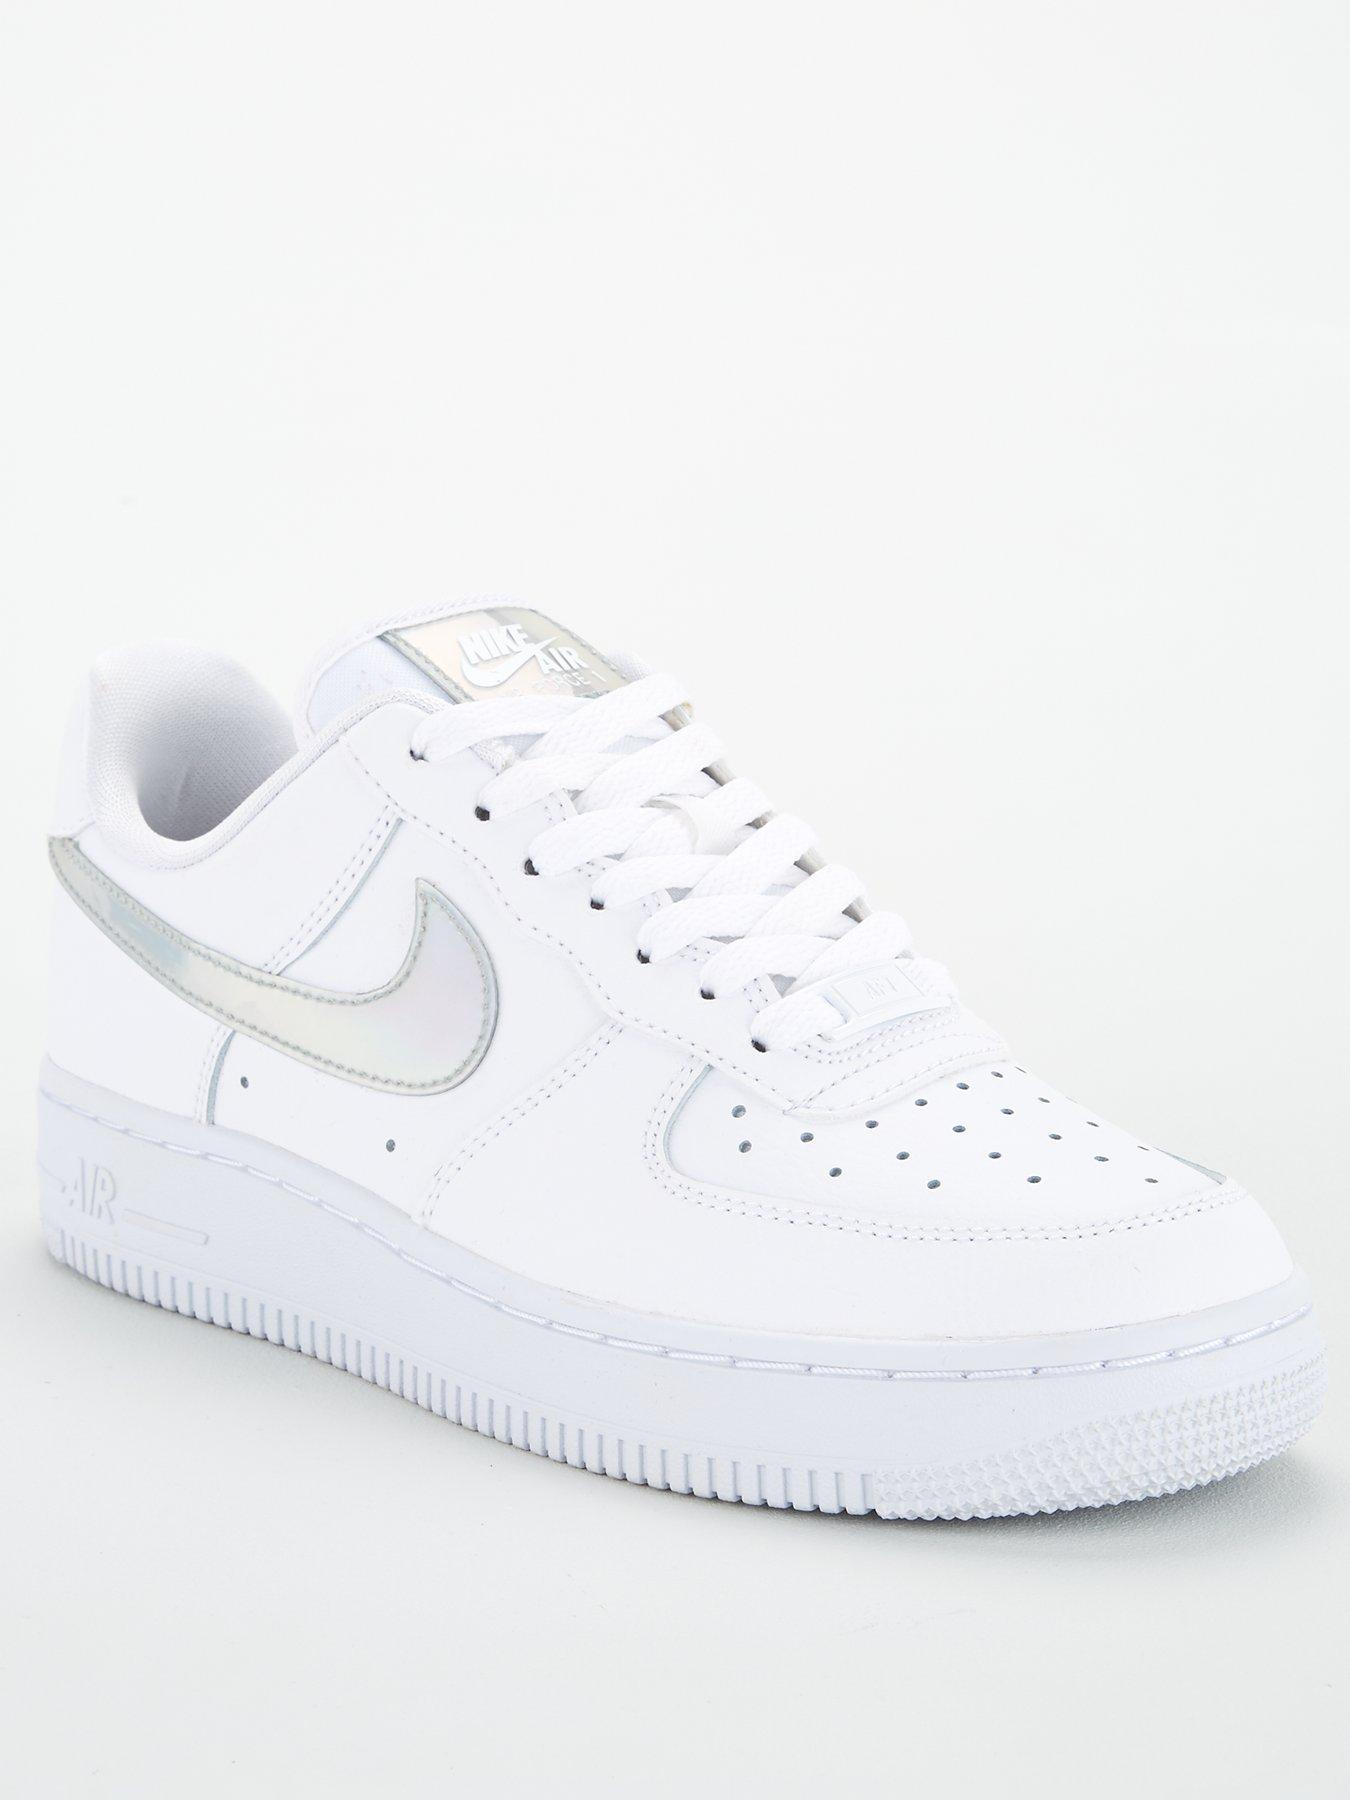 nike air force 1 07 size 